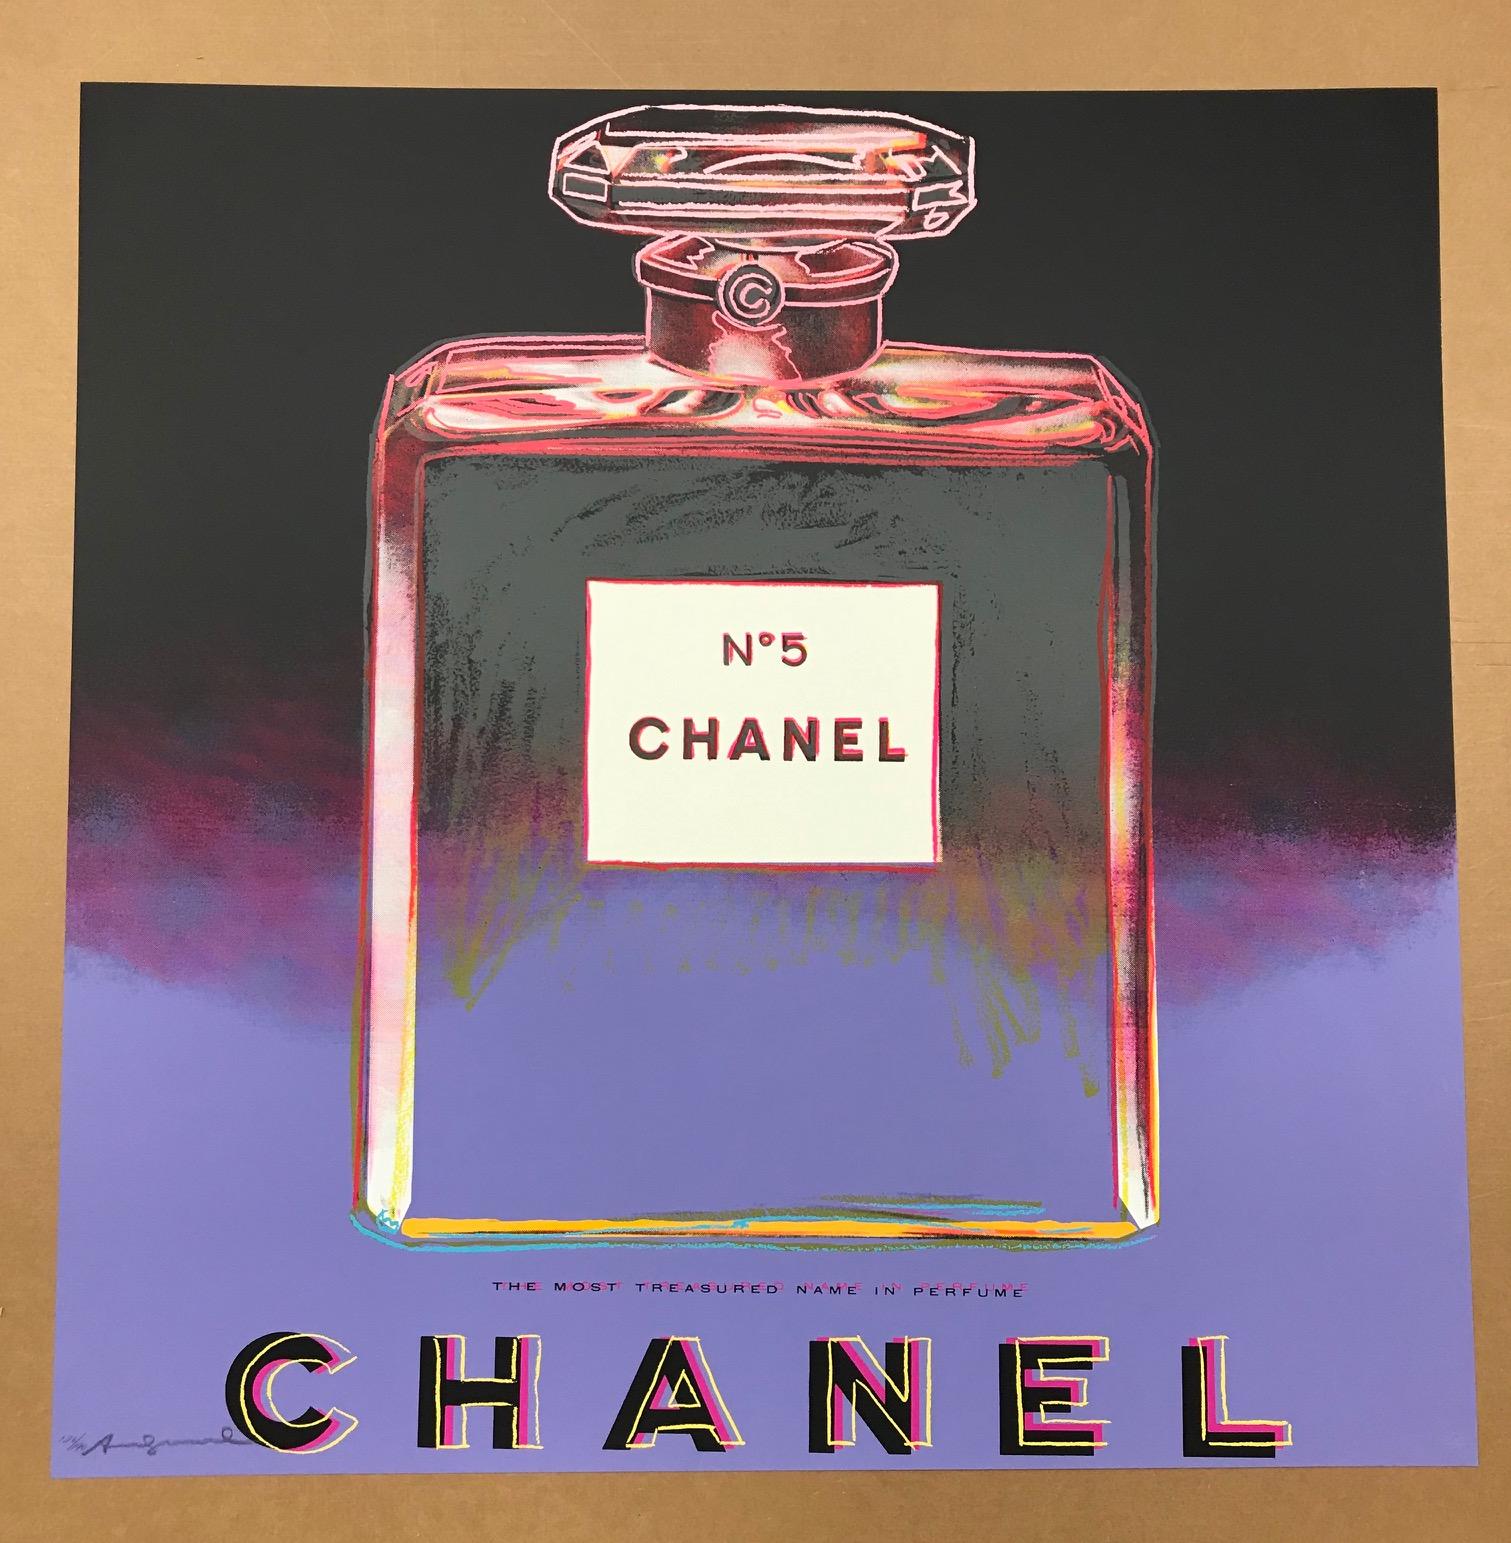 Chanel from Ads F&S II.354 - Print by Andy Warhol